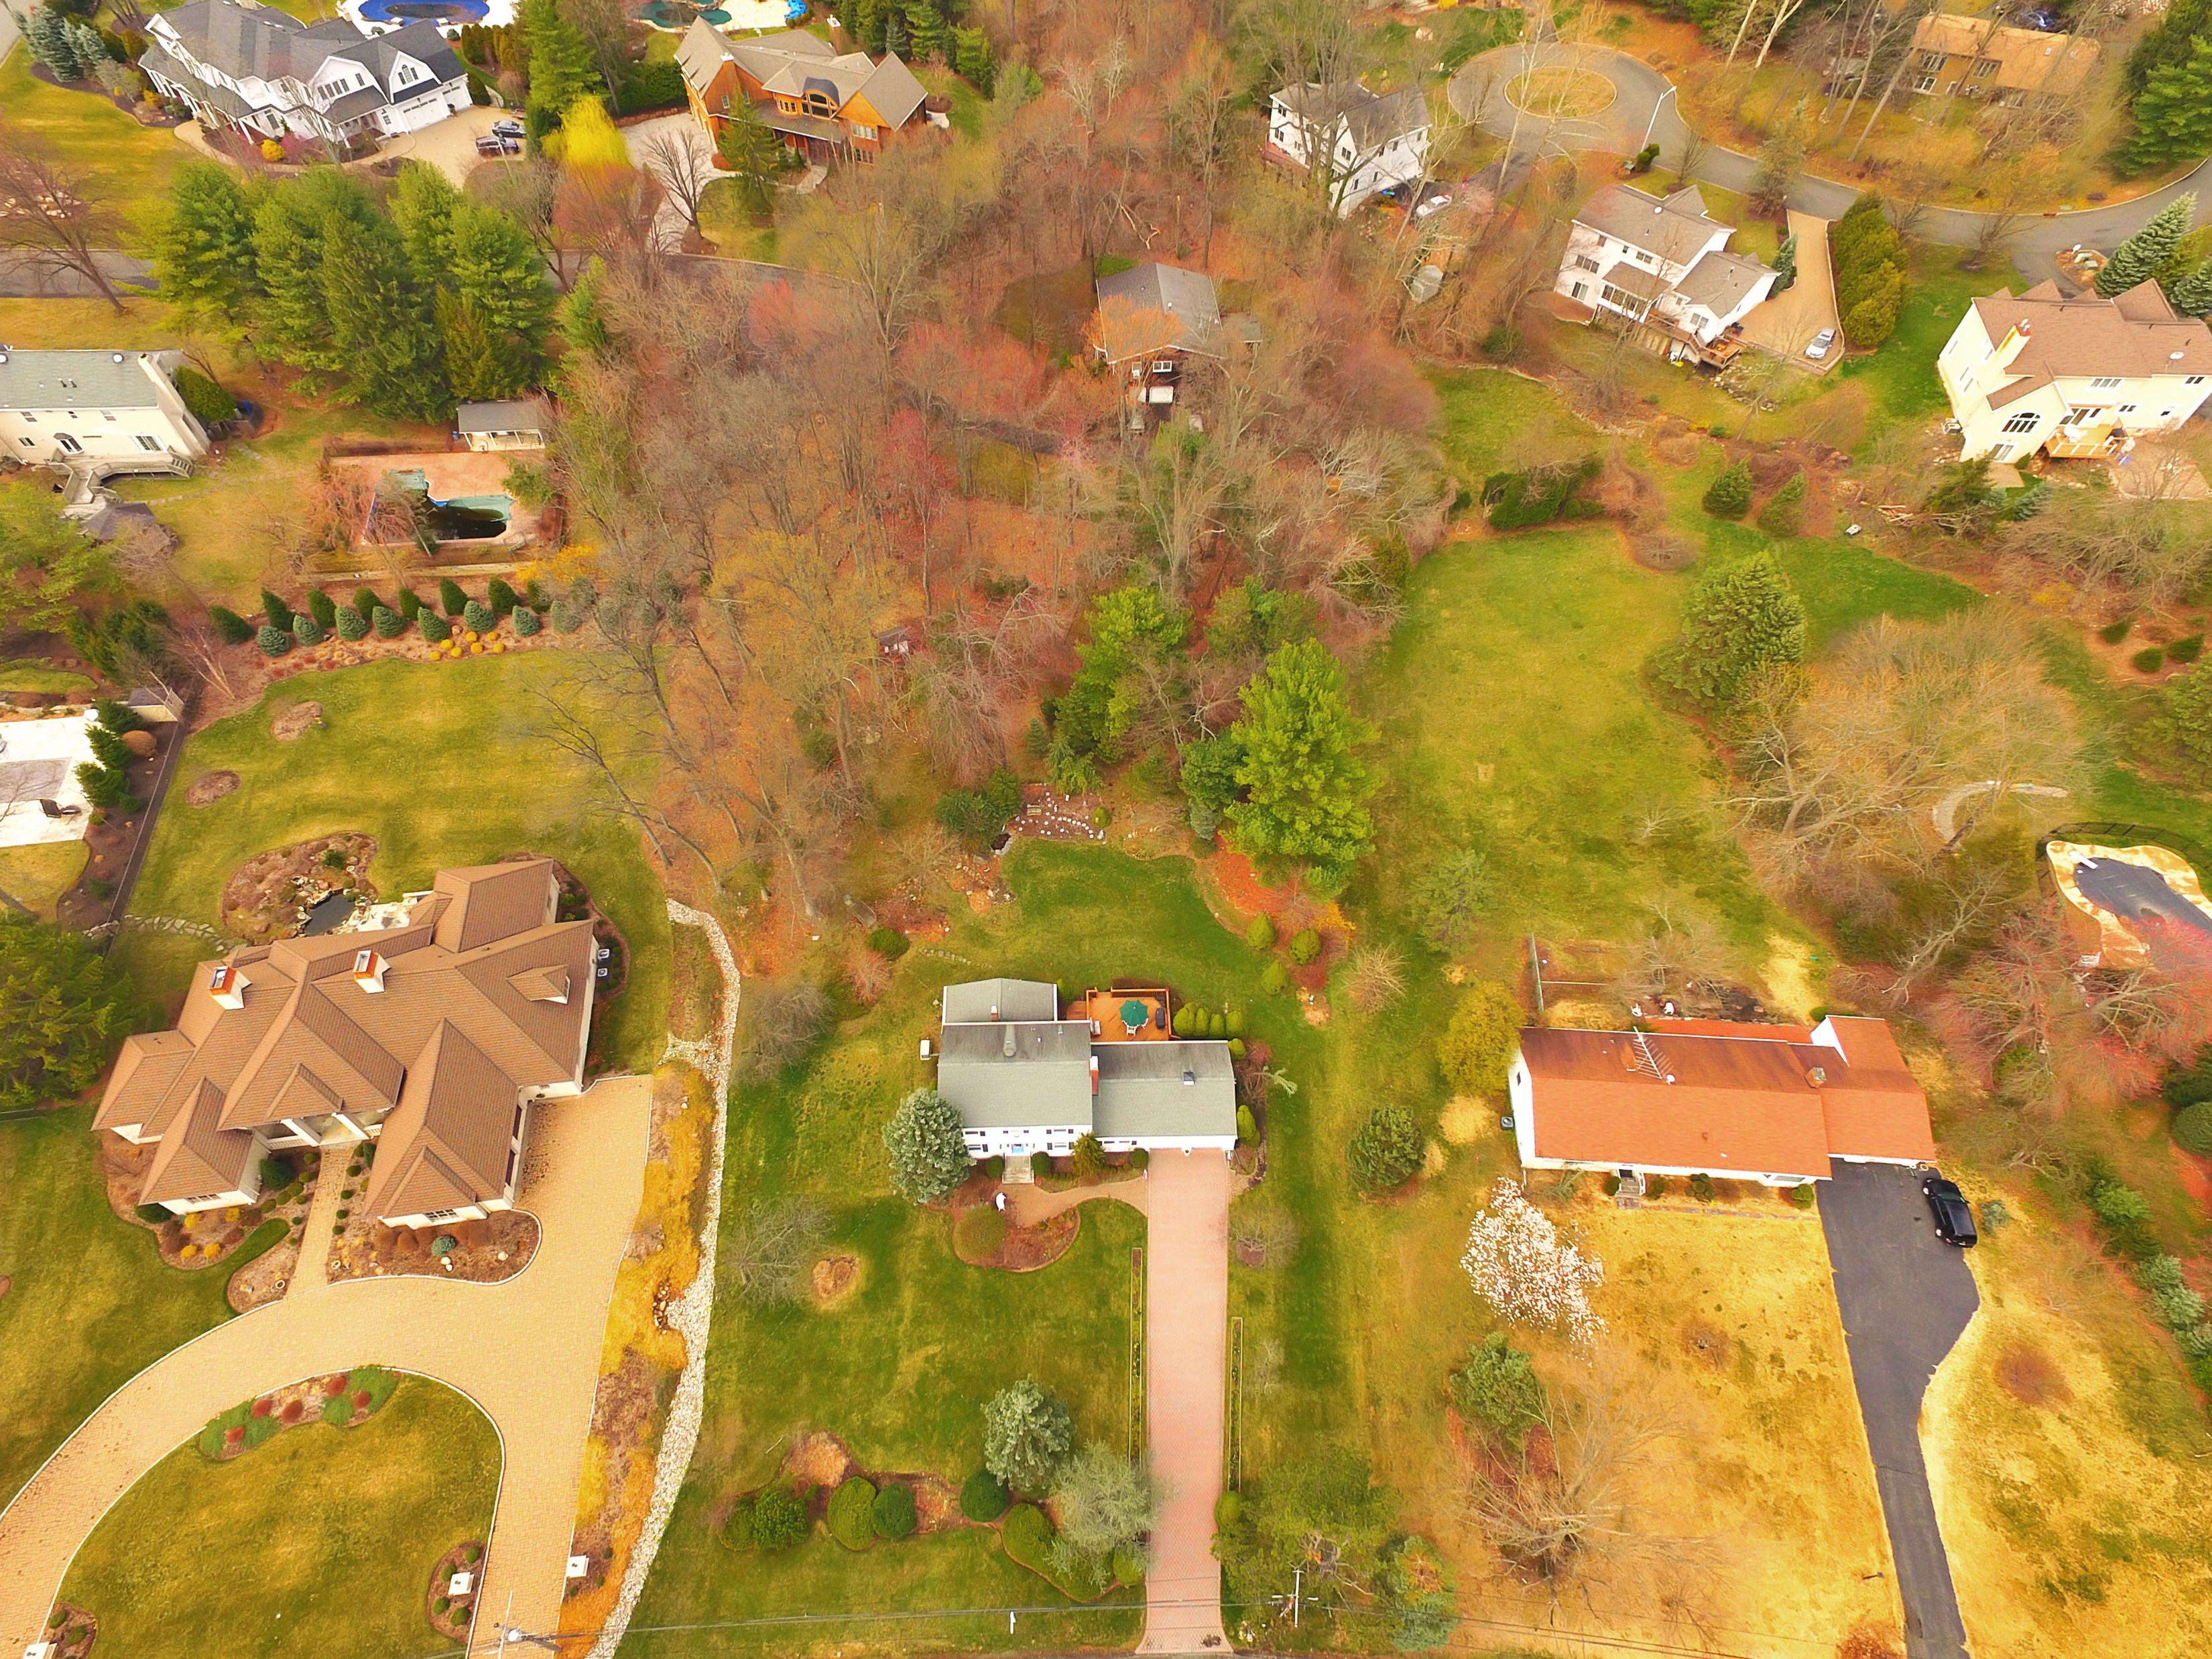 20 old tappan rd old tappan nj 07675 droneview